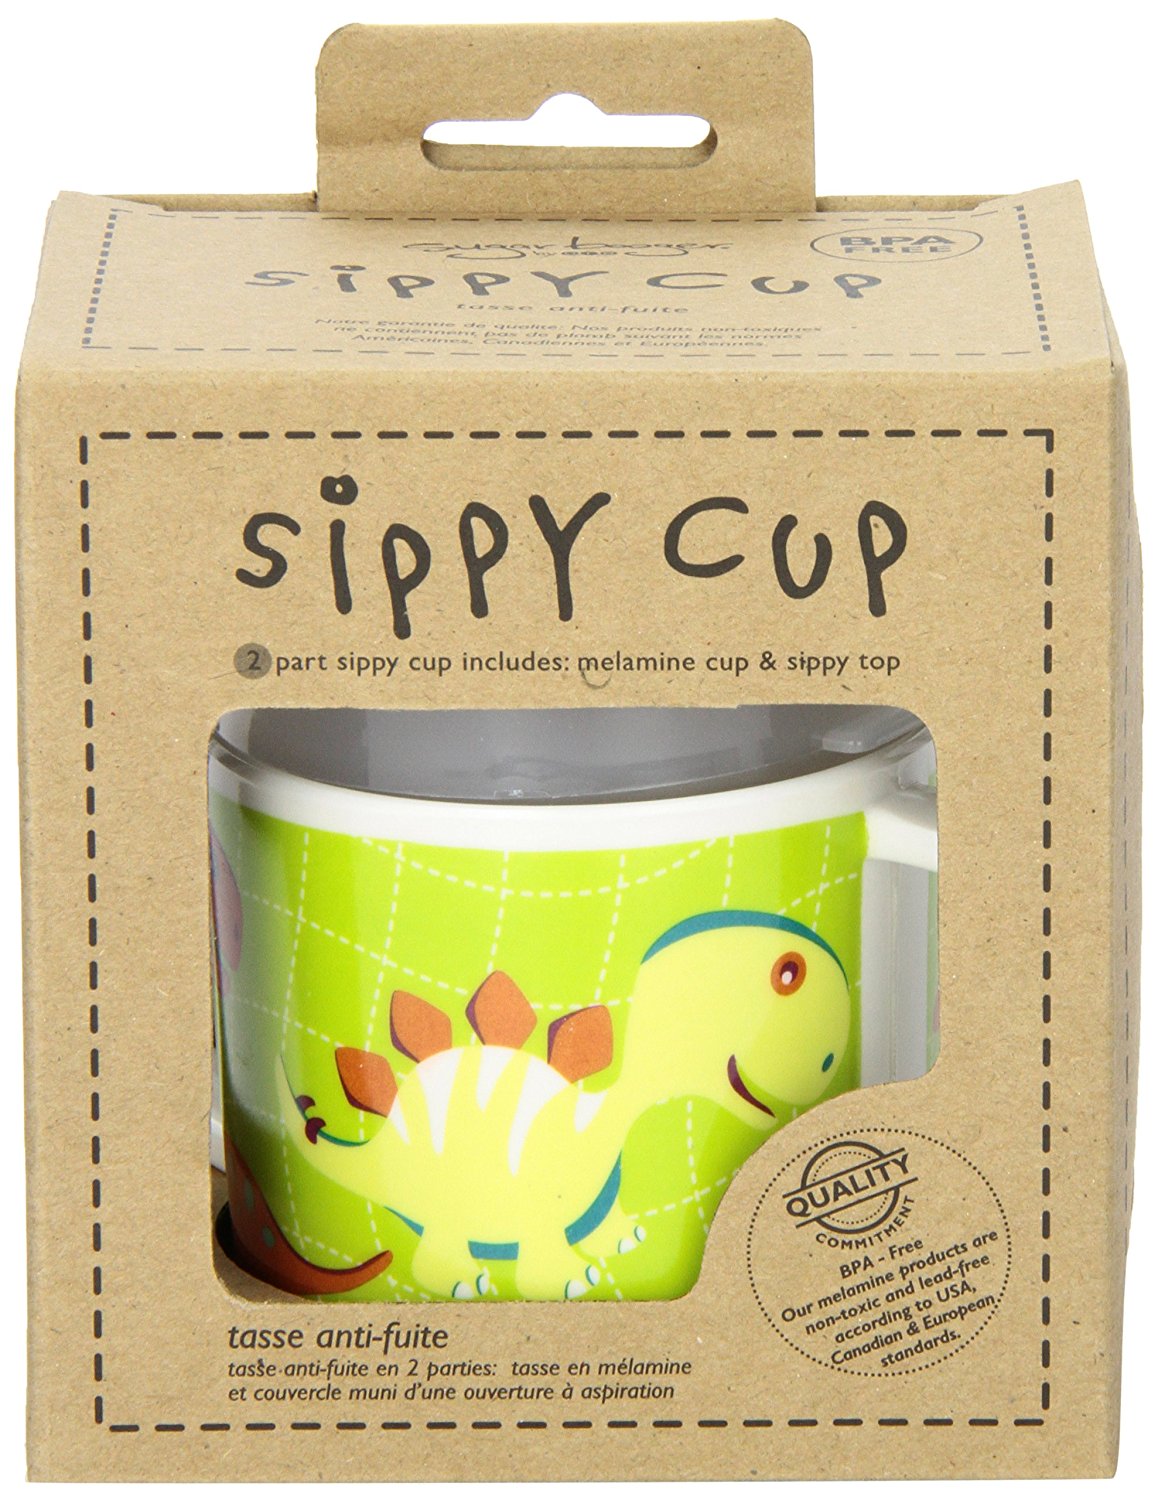 Prehistoric Pals Sippy Cup (2.5"H x 4"diam, holds 6oz)